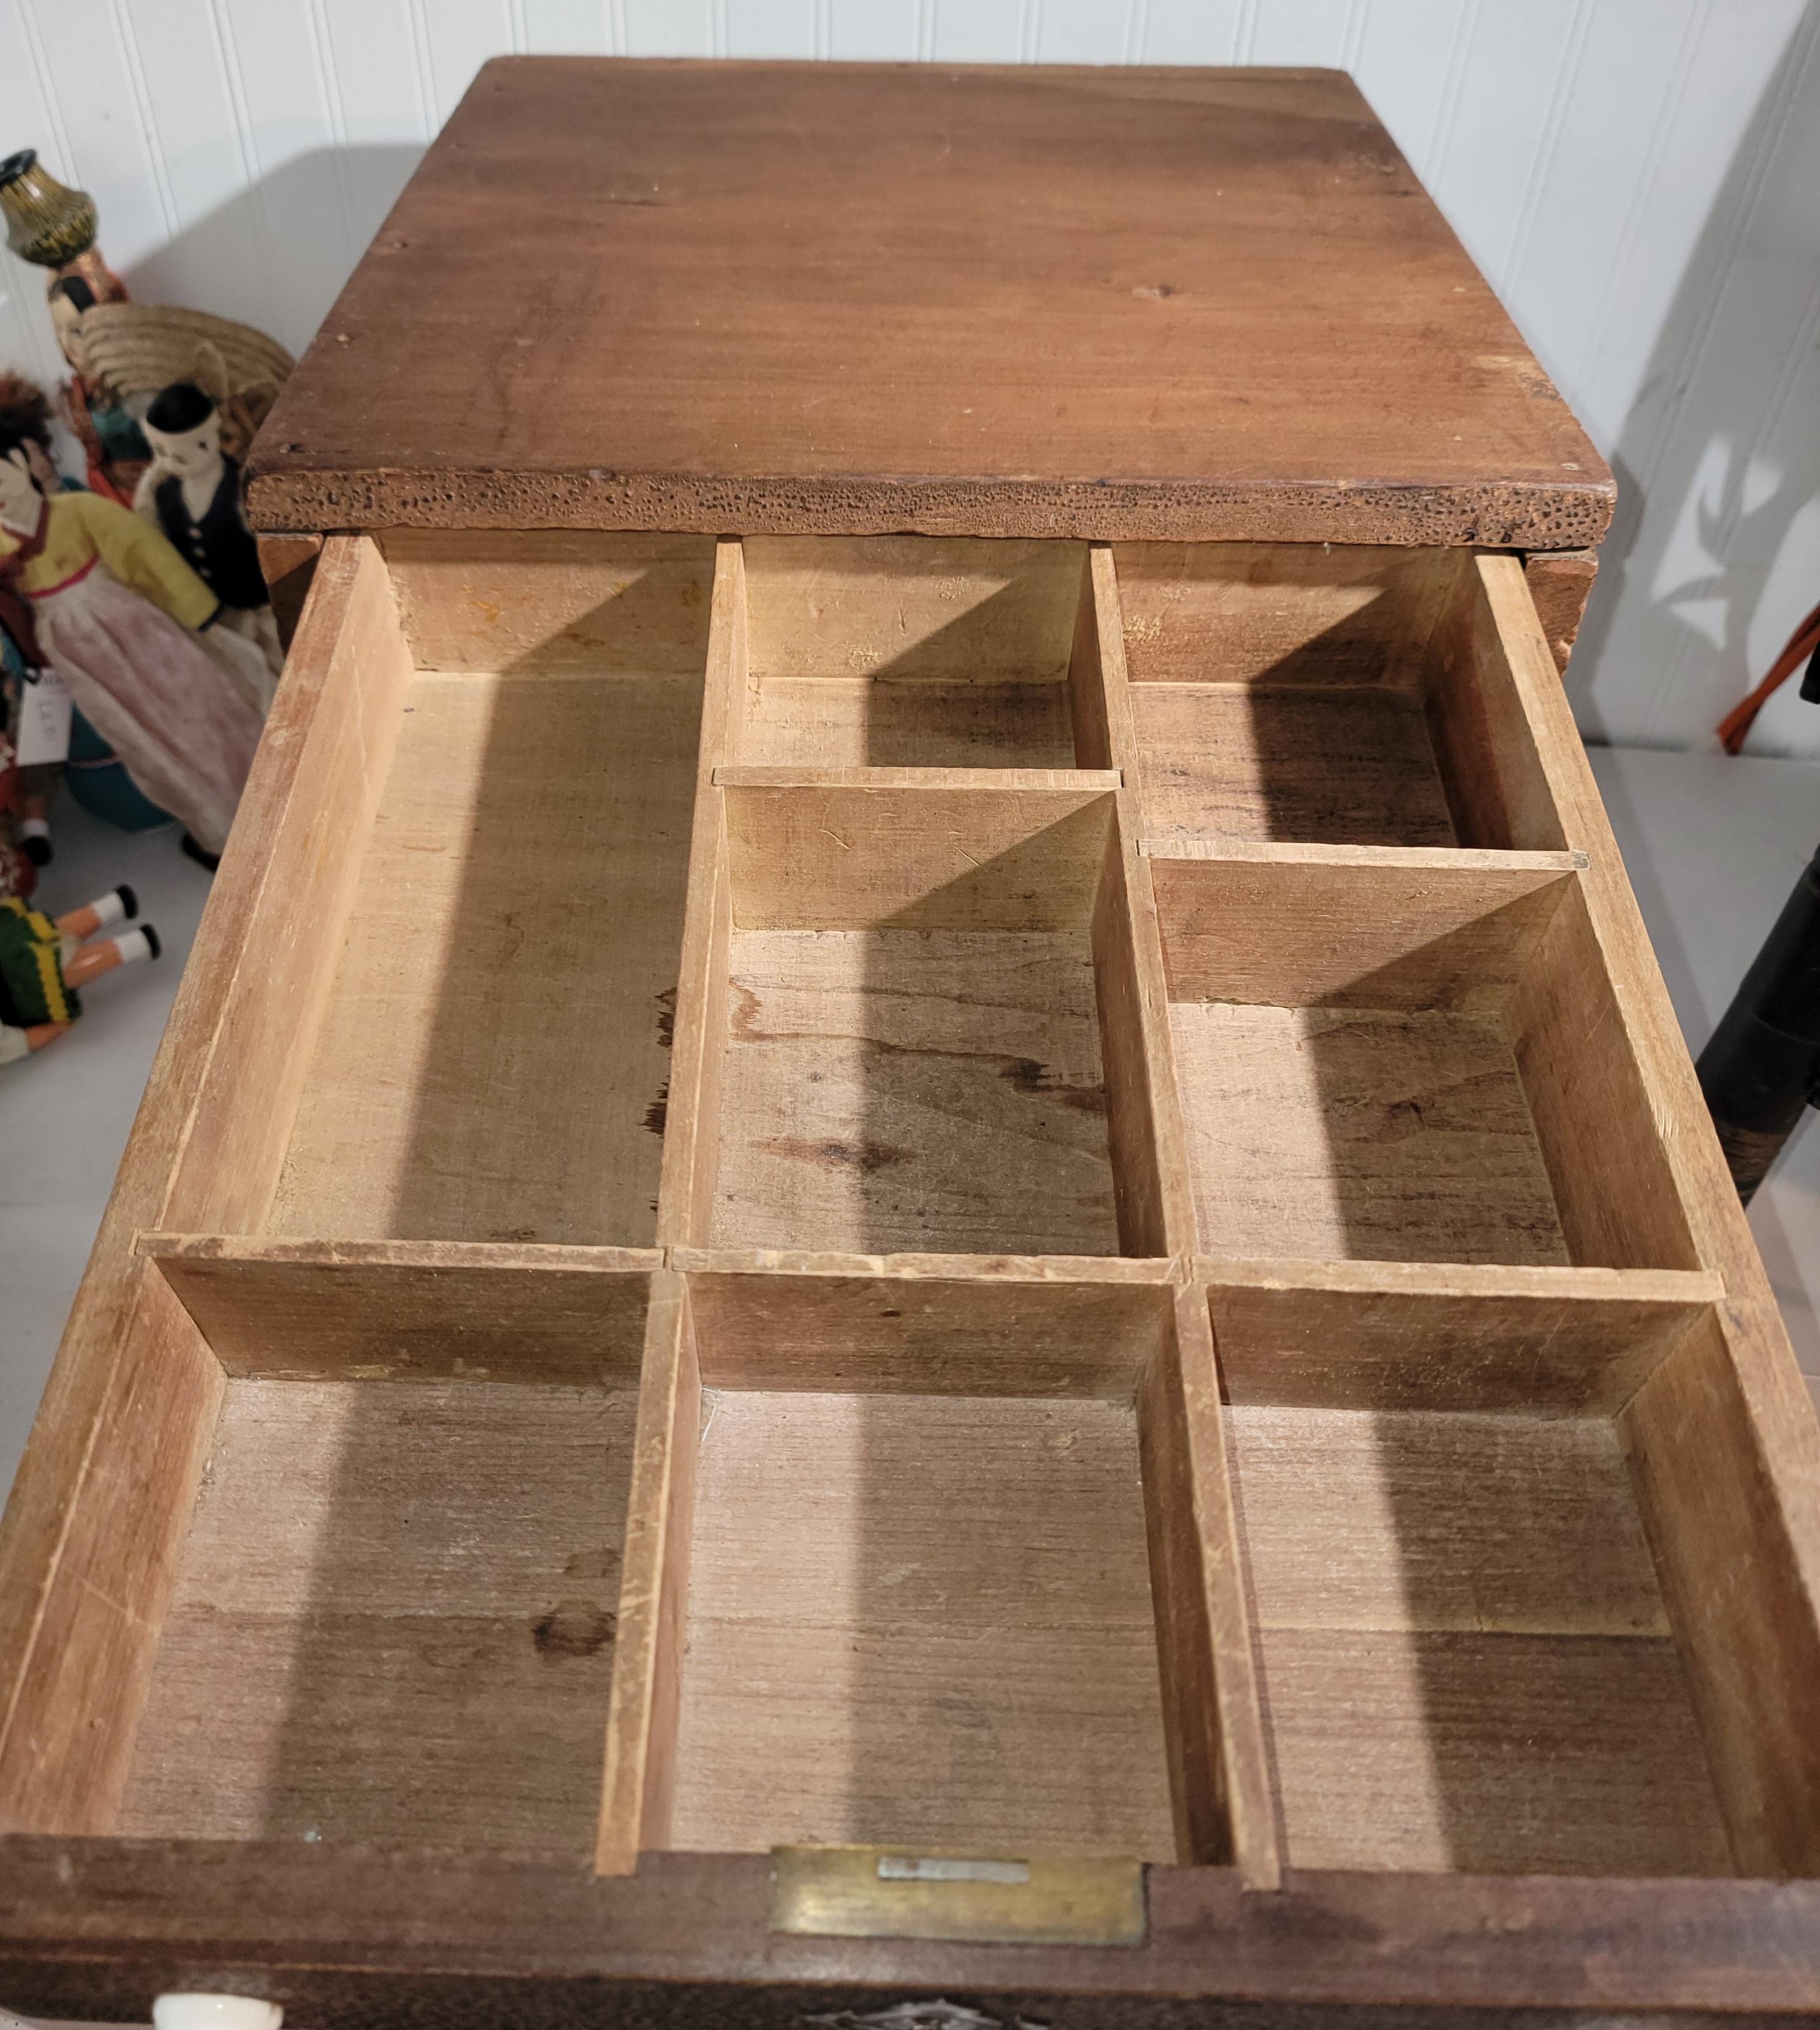 This is either a 19thc hardware drawer box or a cash drawer of sorts.The construction is early cut nails and a dovetailed drawer.There is a brass & iron handle on the side of the box for carrying from place to place.There is a key hole in the front